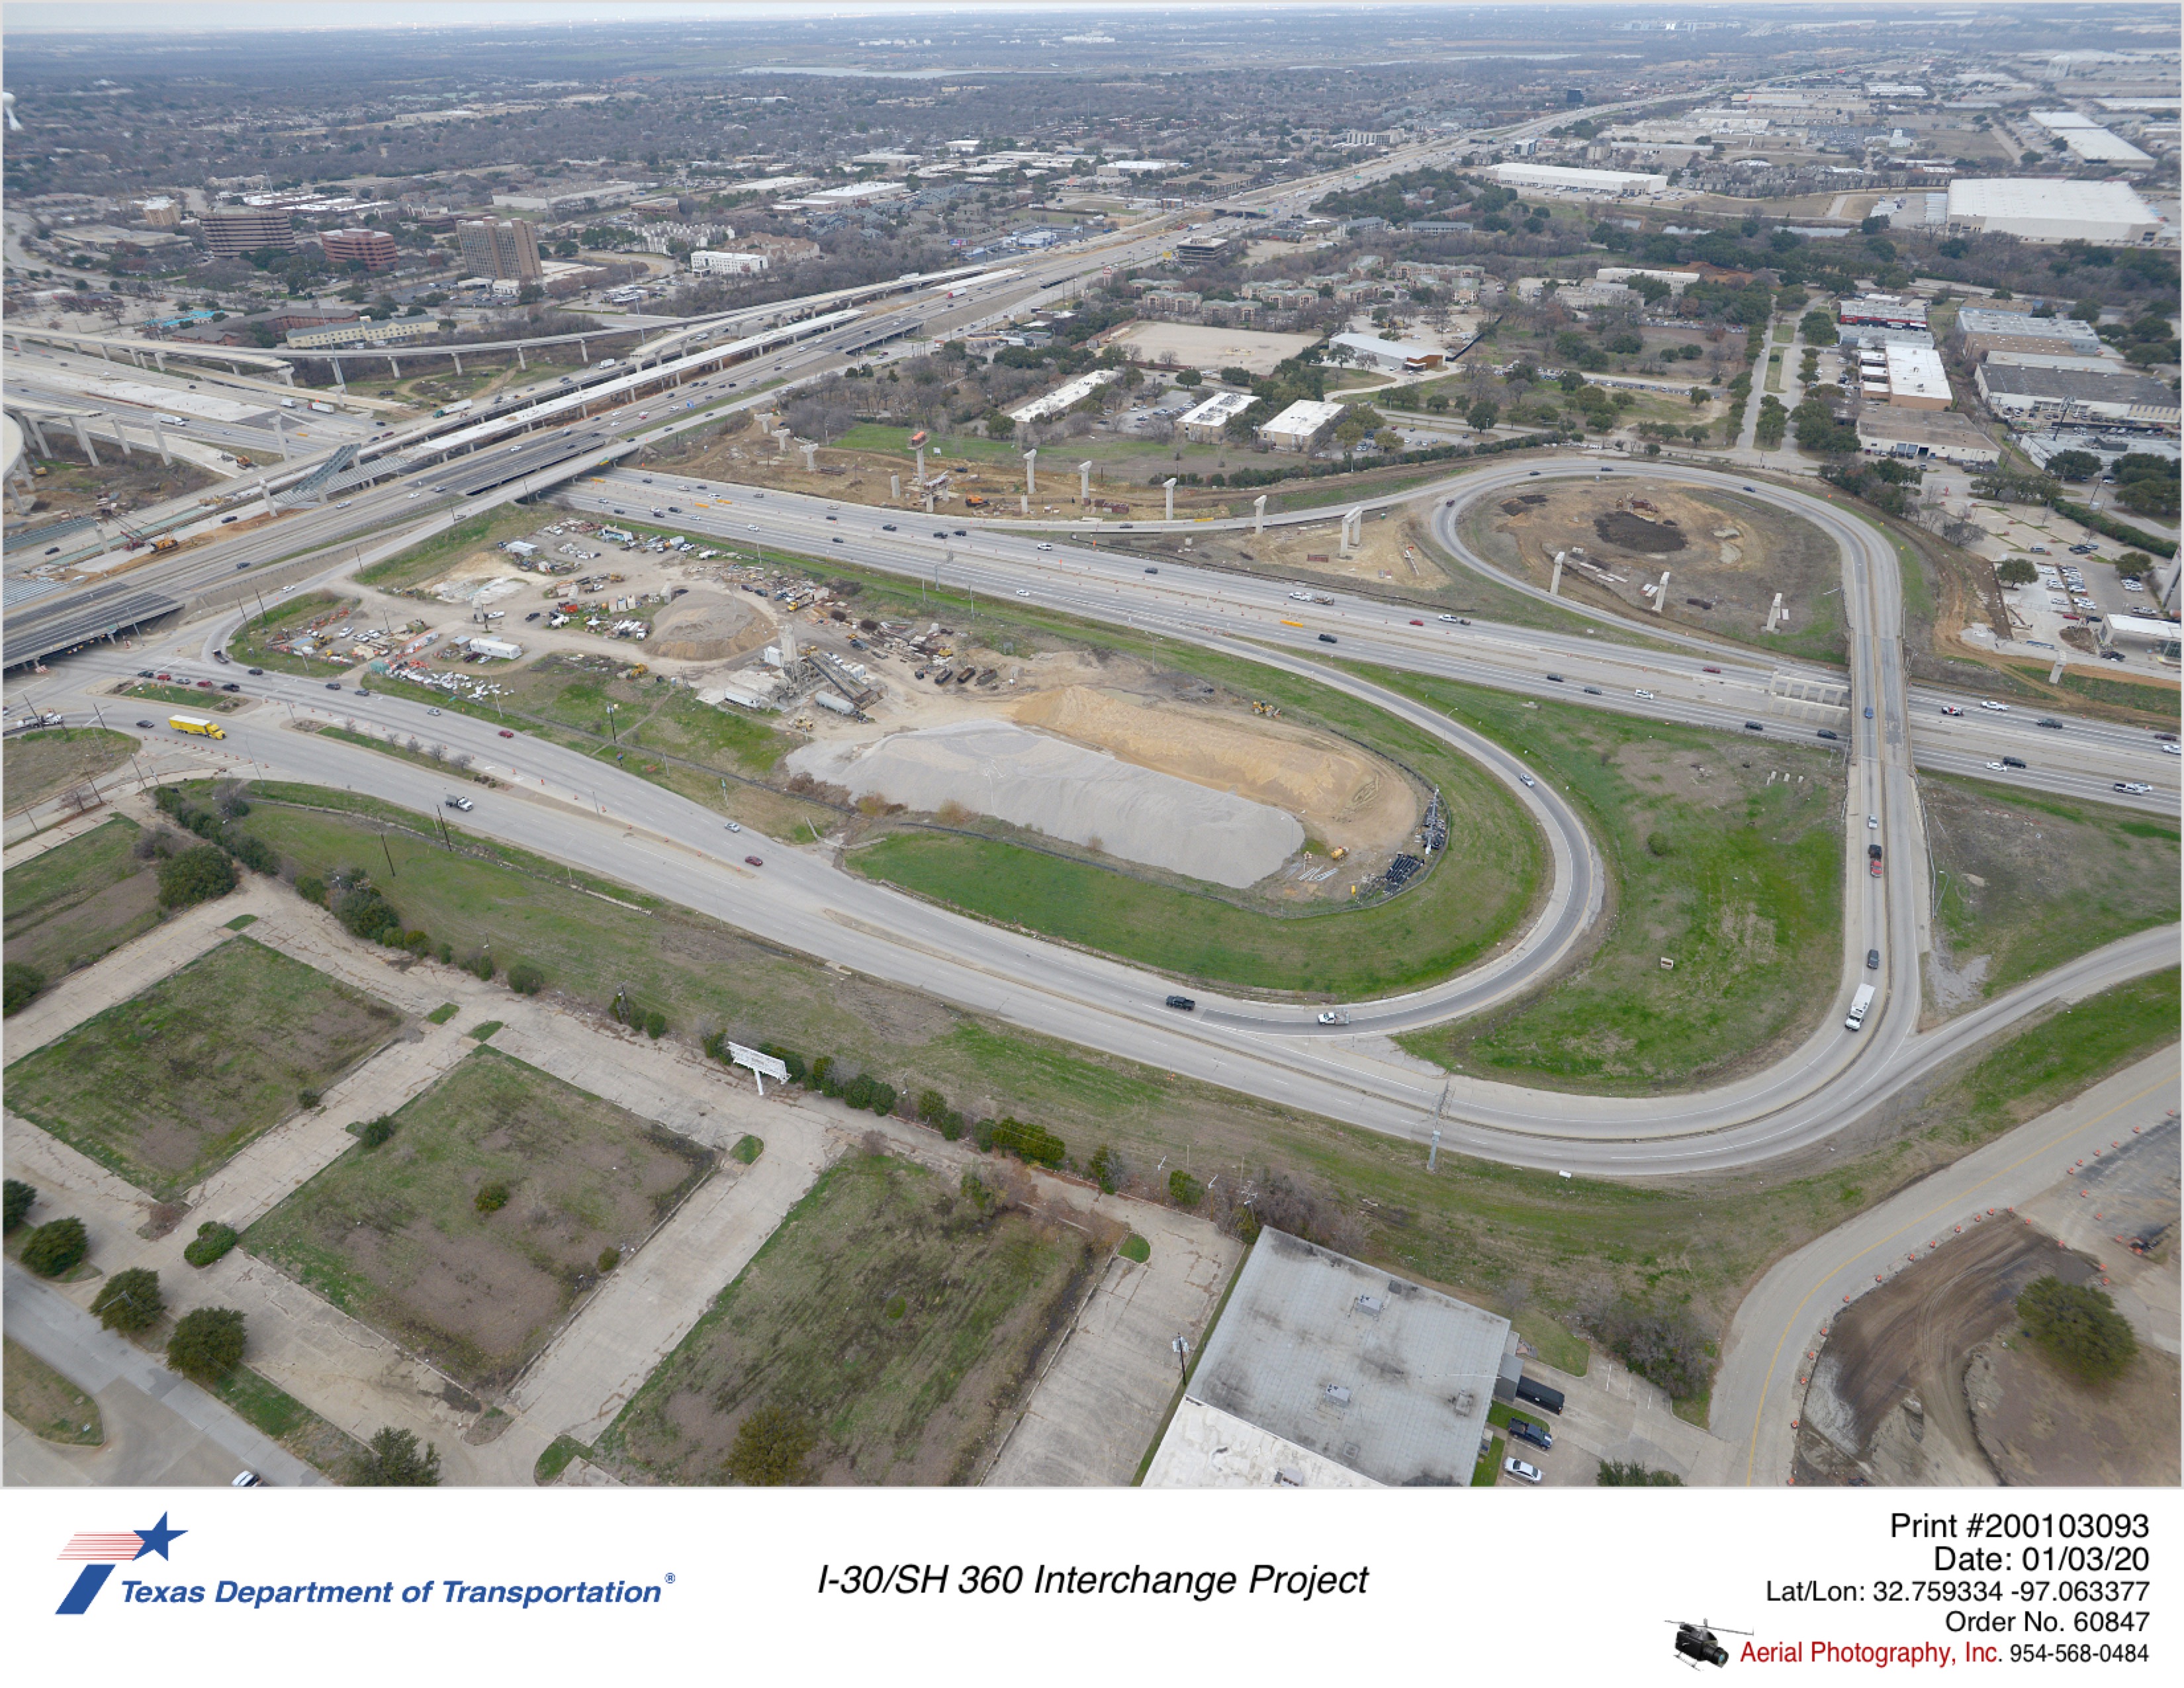 I-30/SH 360 interchange looking northwest. Construction of direct connector ramp substructures is shown on the north side of I-30.